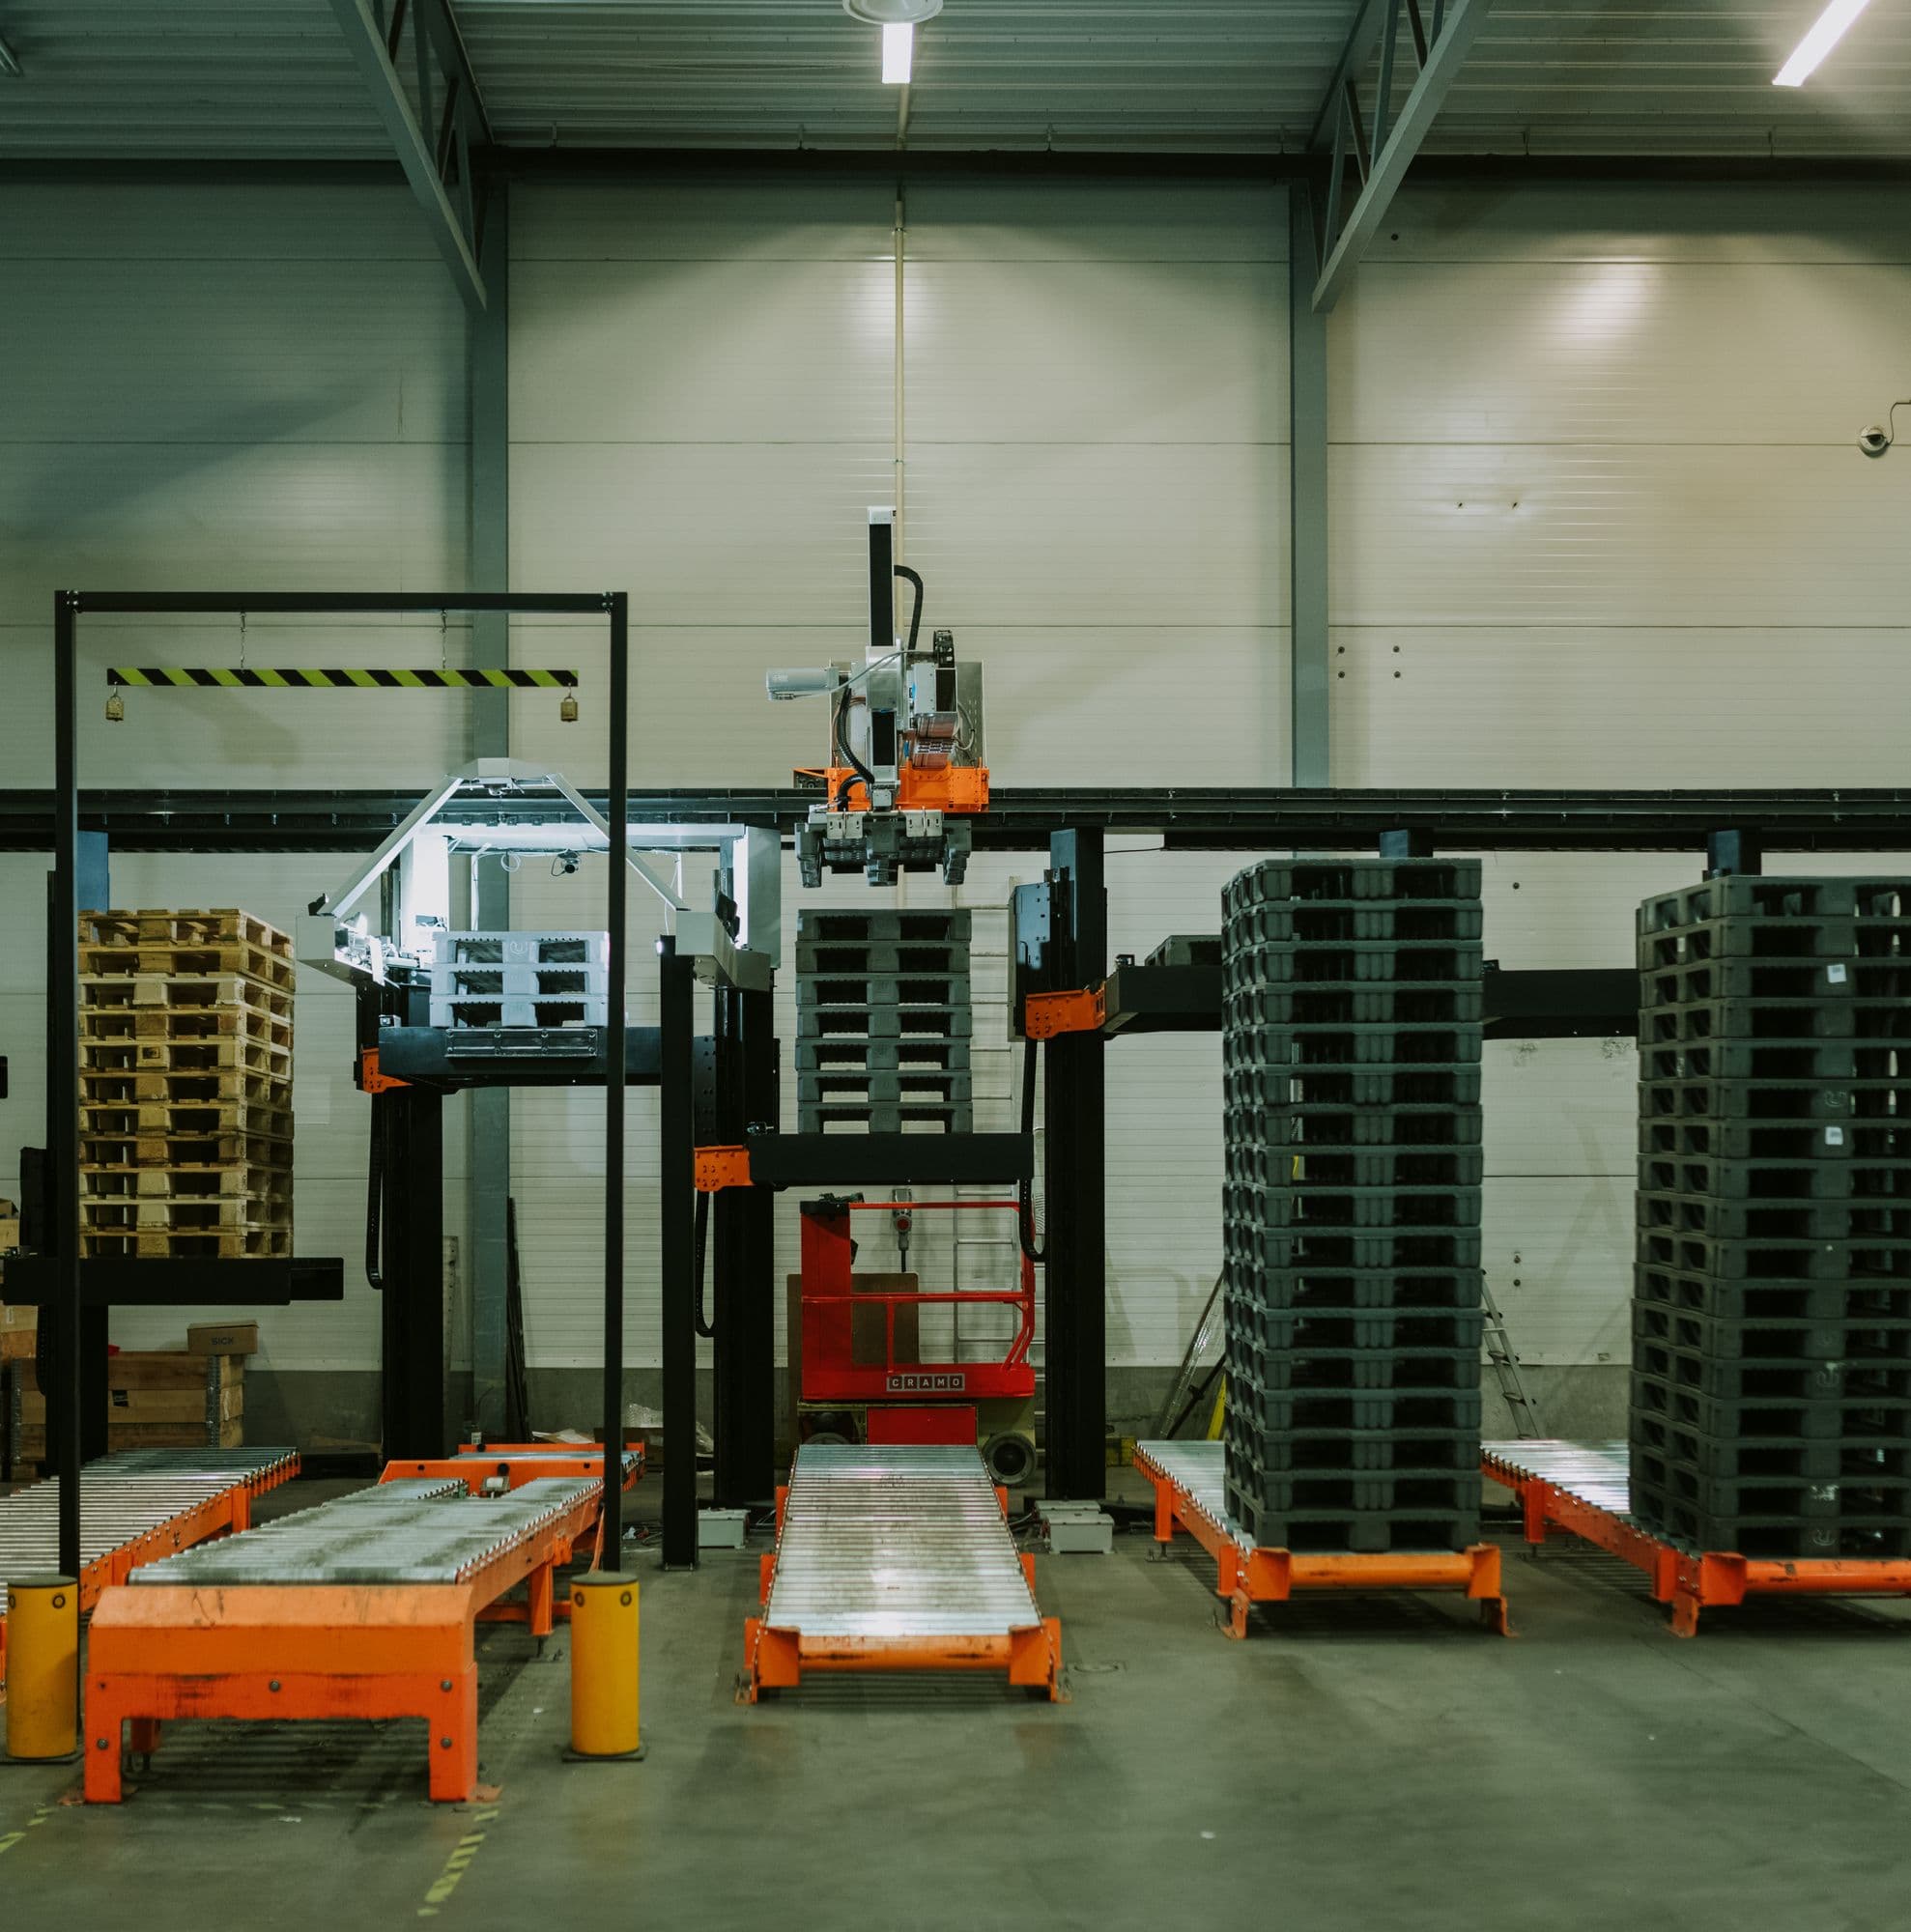 A dimly lit warehouse filled with pallets and a robotic arm sorting them